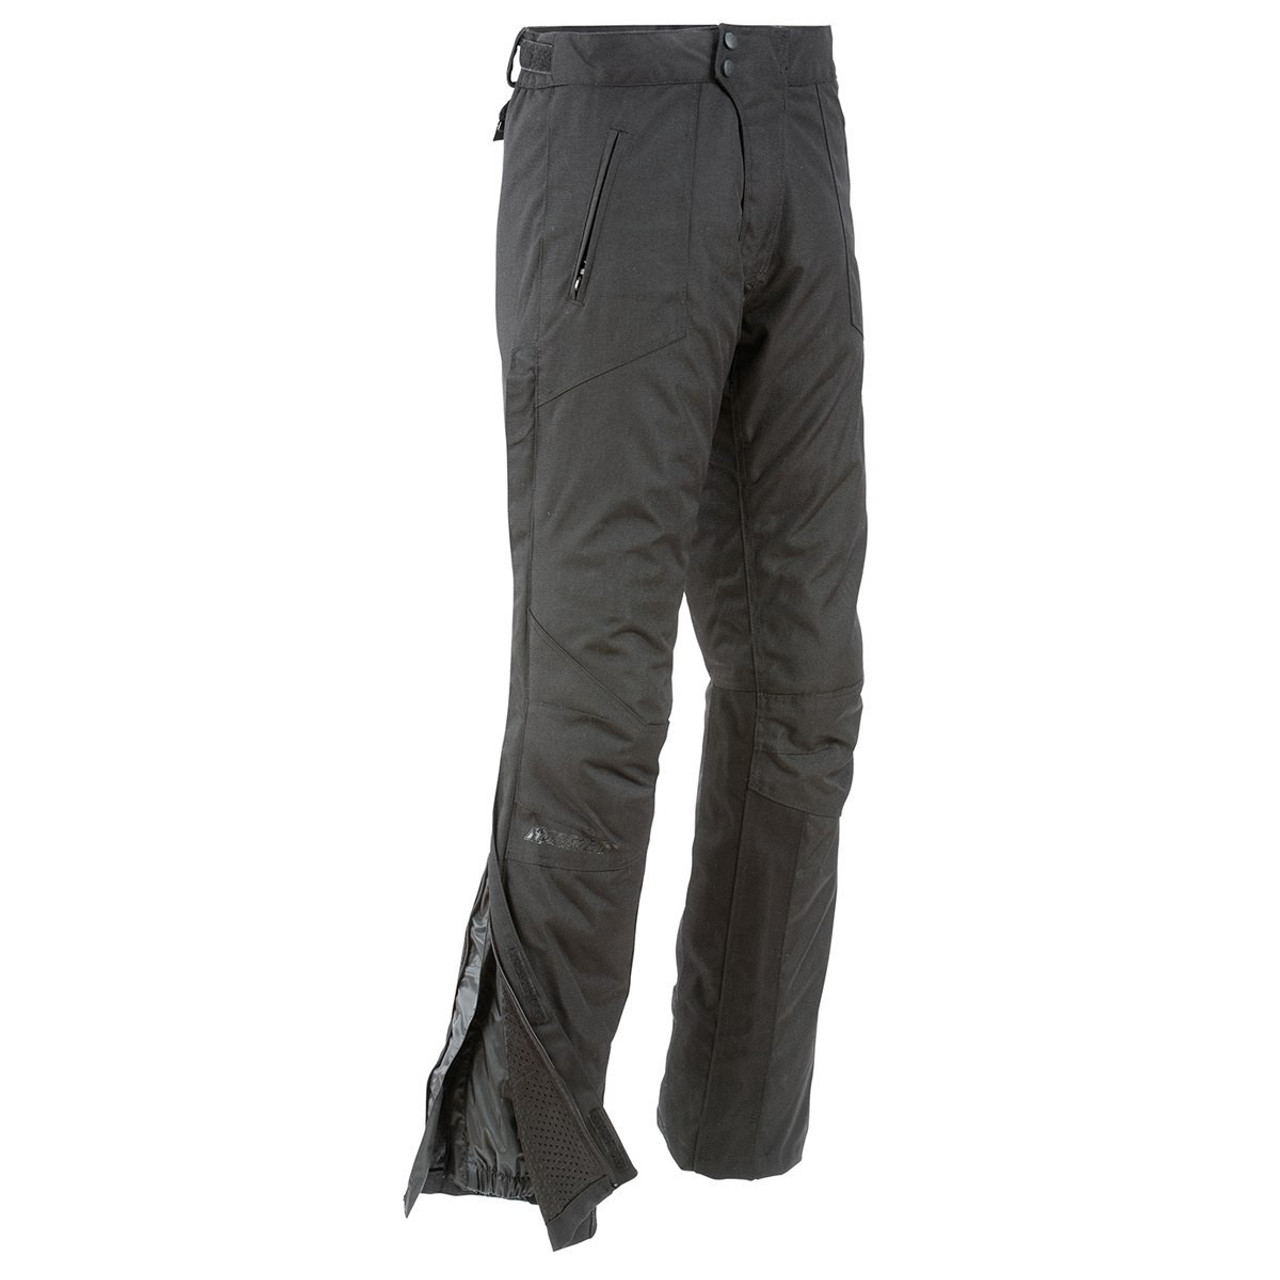 Best Motorcycle Riding Pants - Team Motorcycle